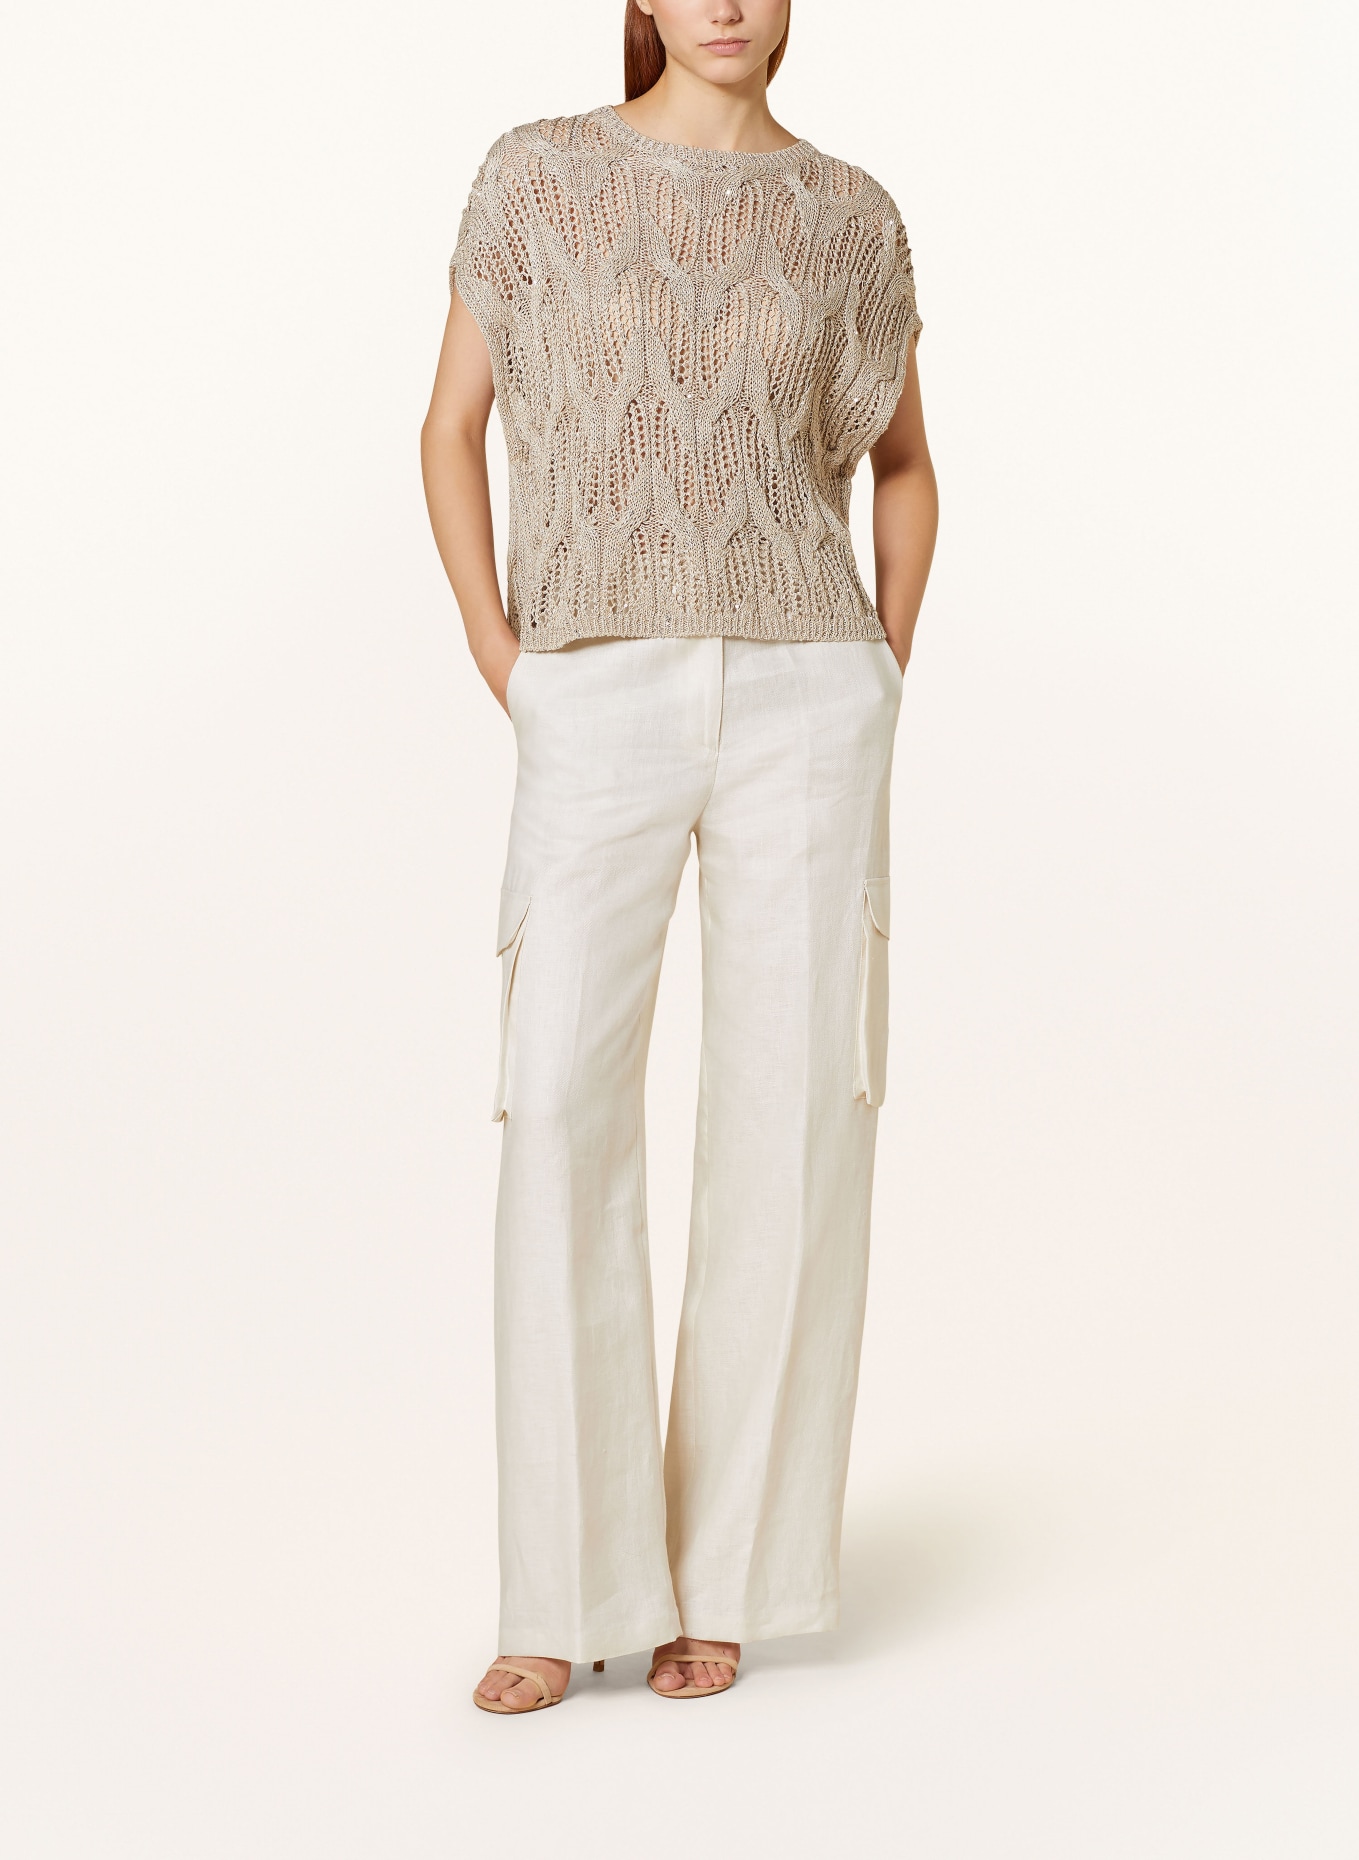 ANTONELLI firenze Knit shirt ITALICO with sequins, Color: BEIGE (Image 2)